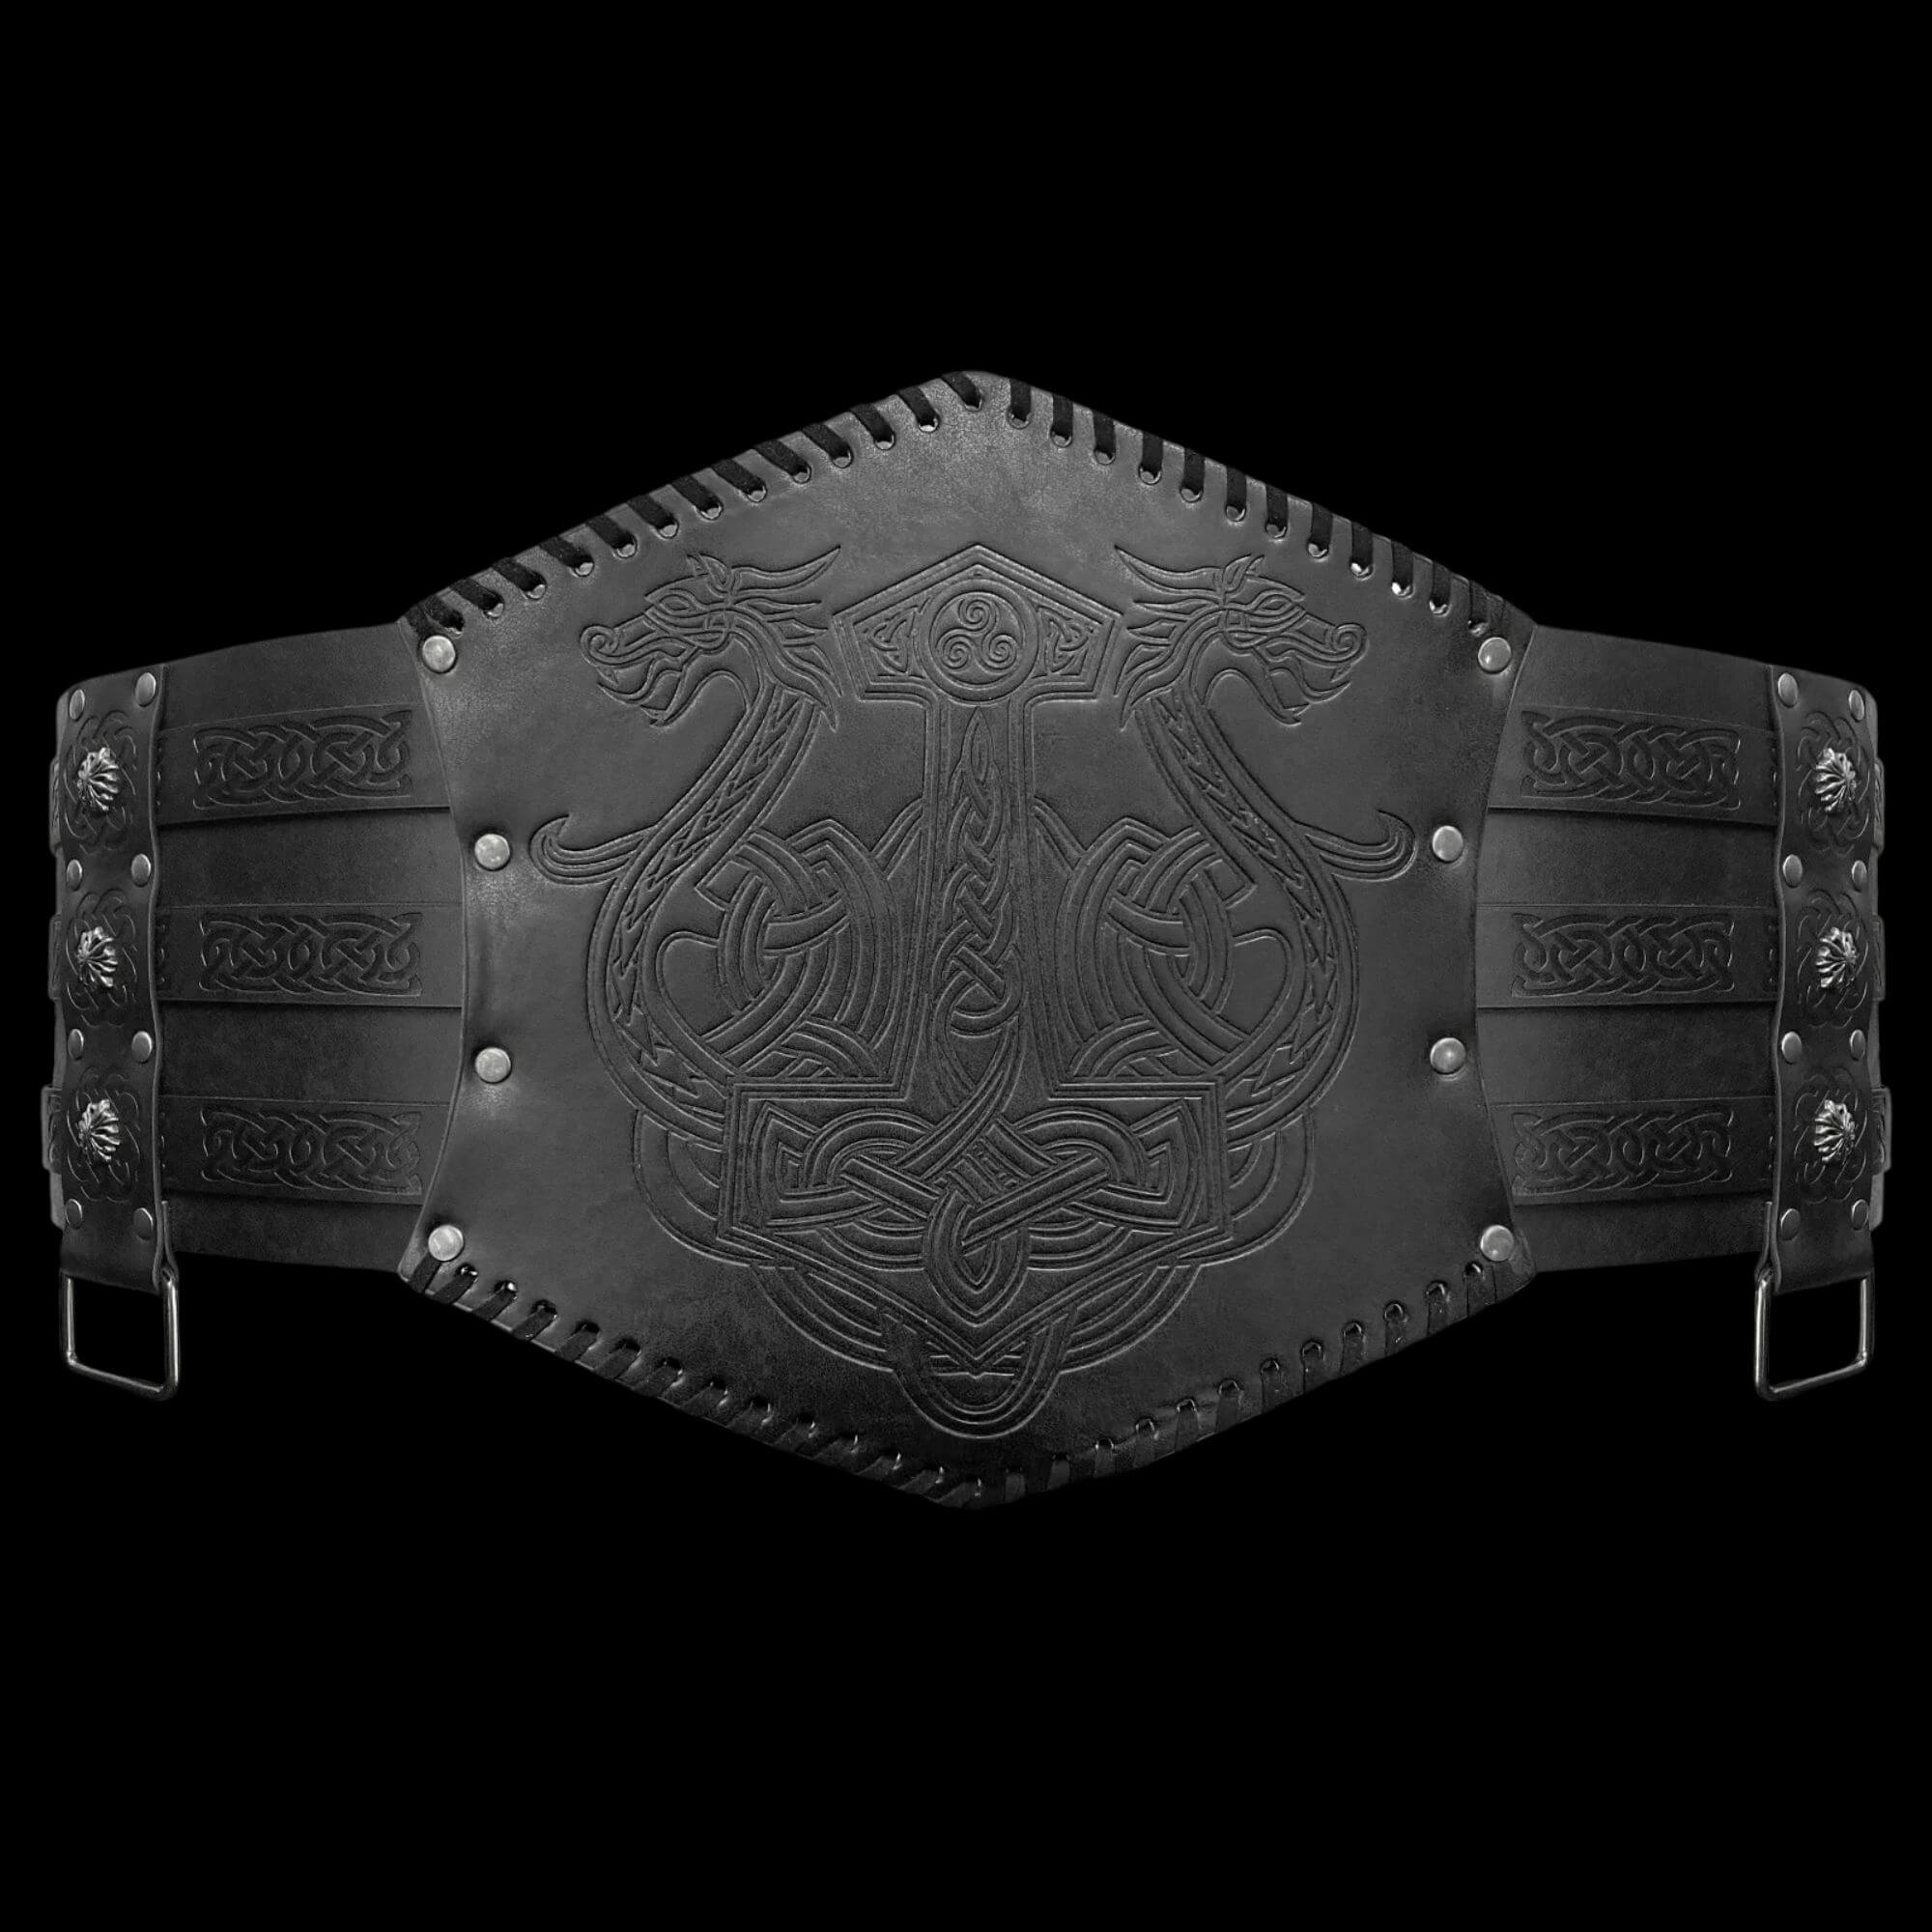 Leather Belt With Norse Symbols